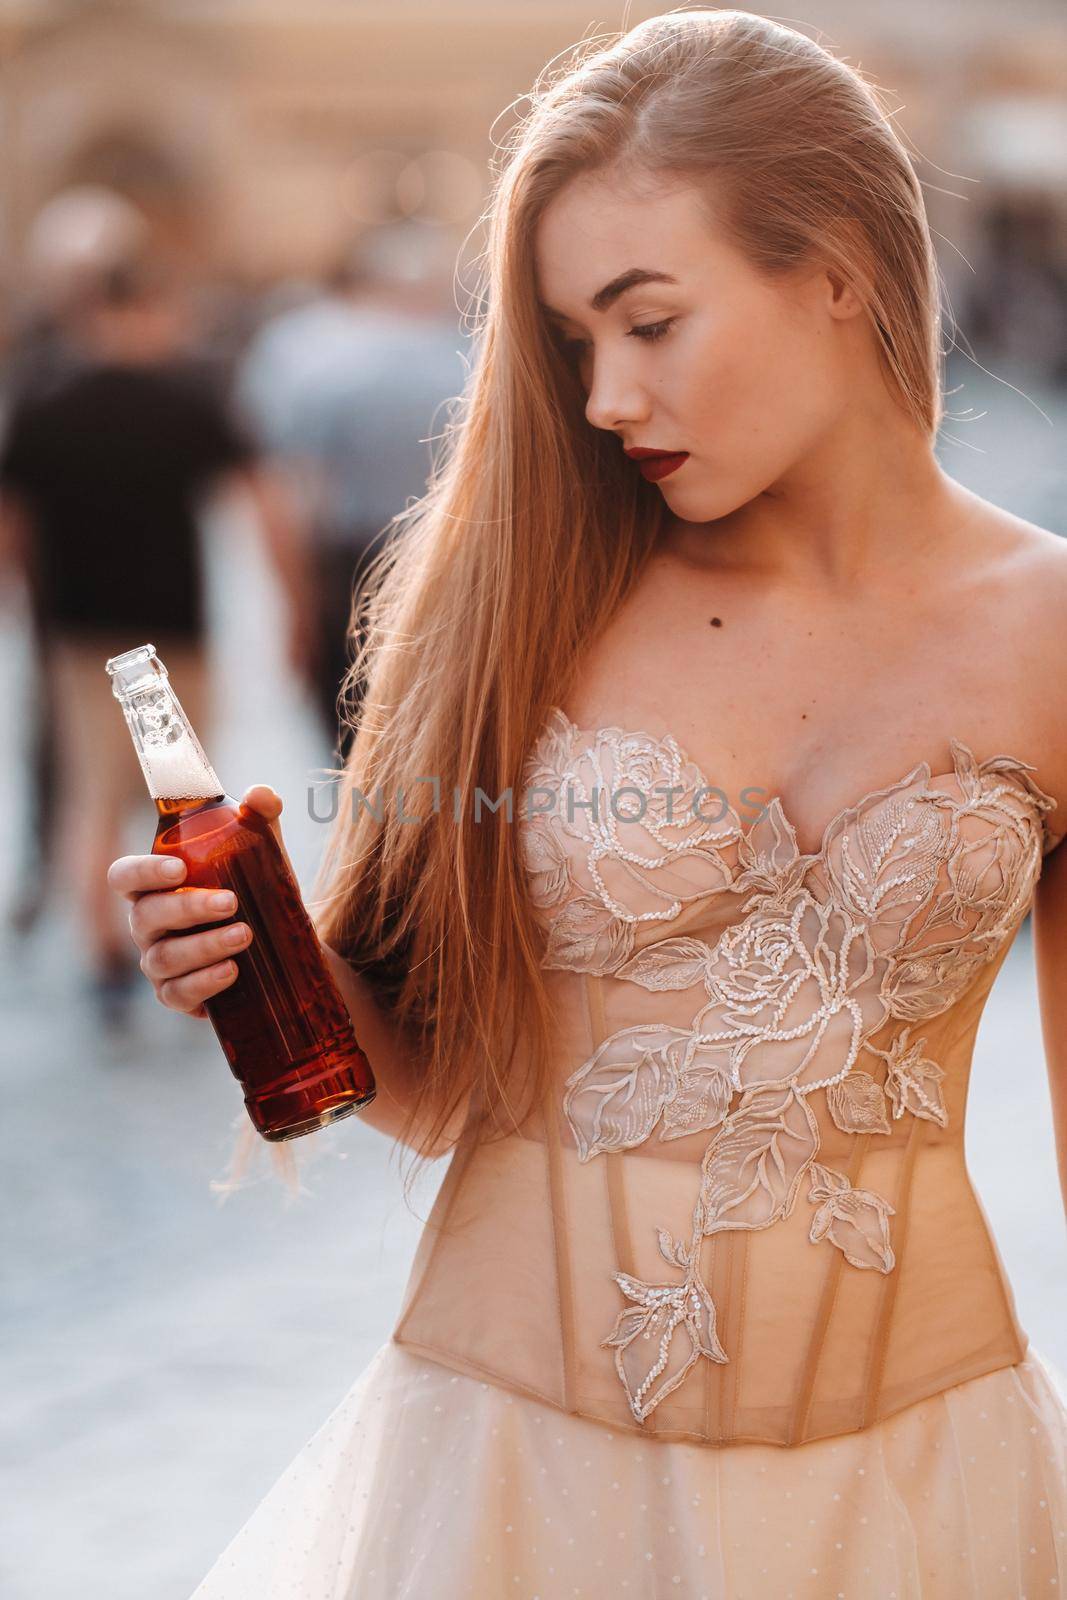 A bride in a wedding dress with long hair and a drink bottle in the Old town of Wroclaw. Wedding photo shoot in the center of an old Polish city.Wroclaw, Poland by Lobachad